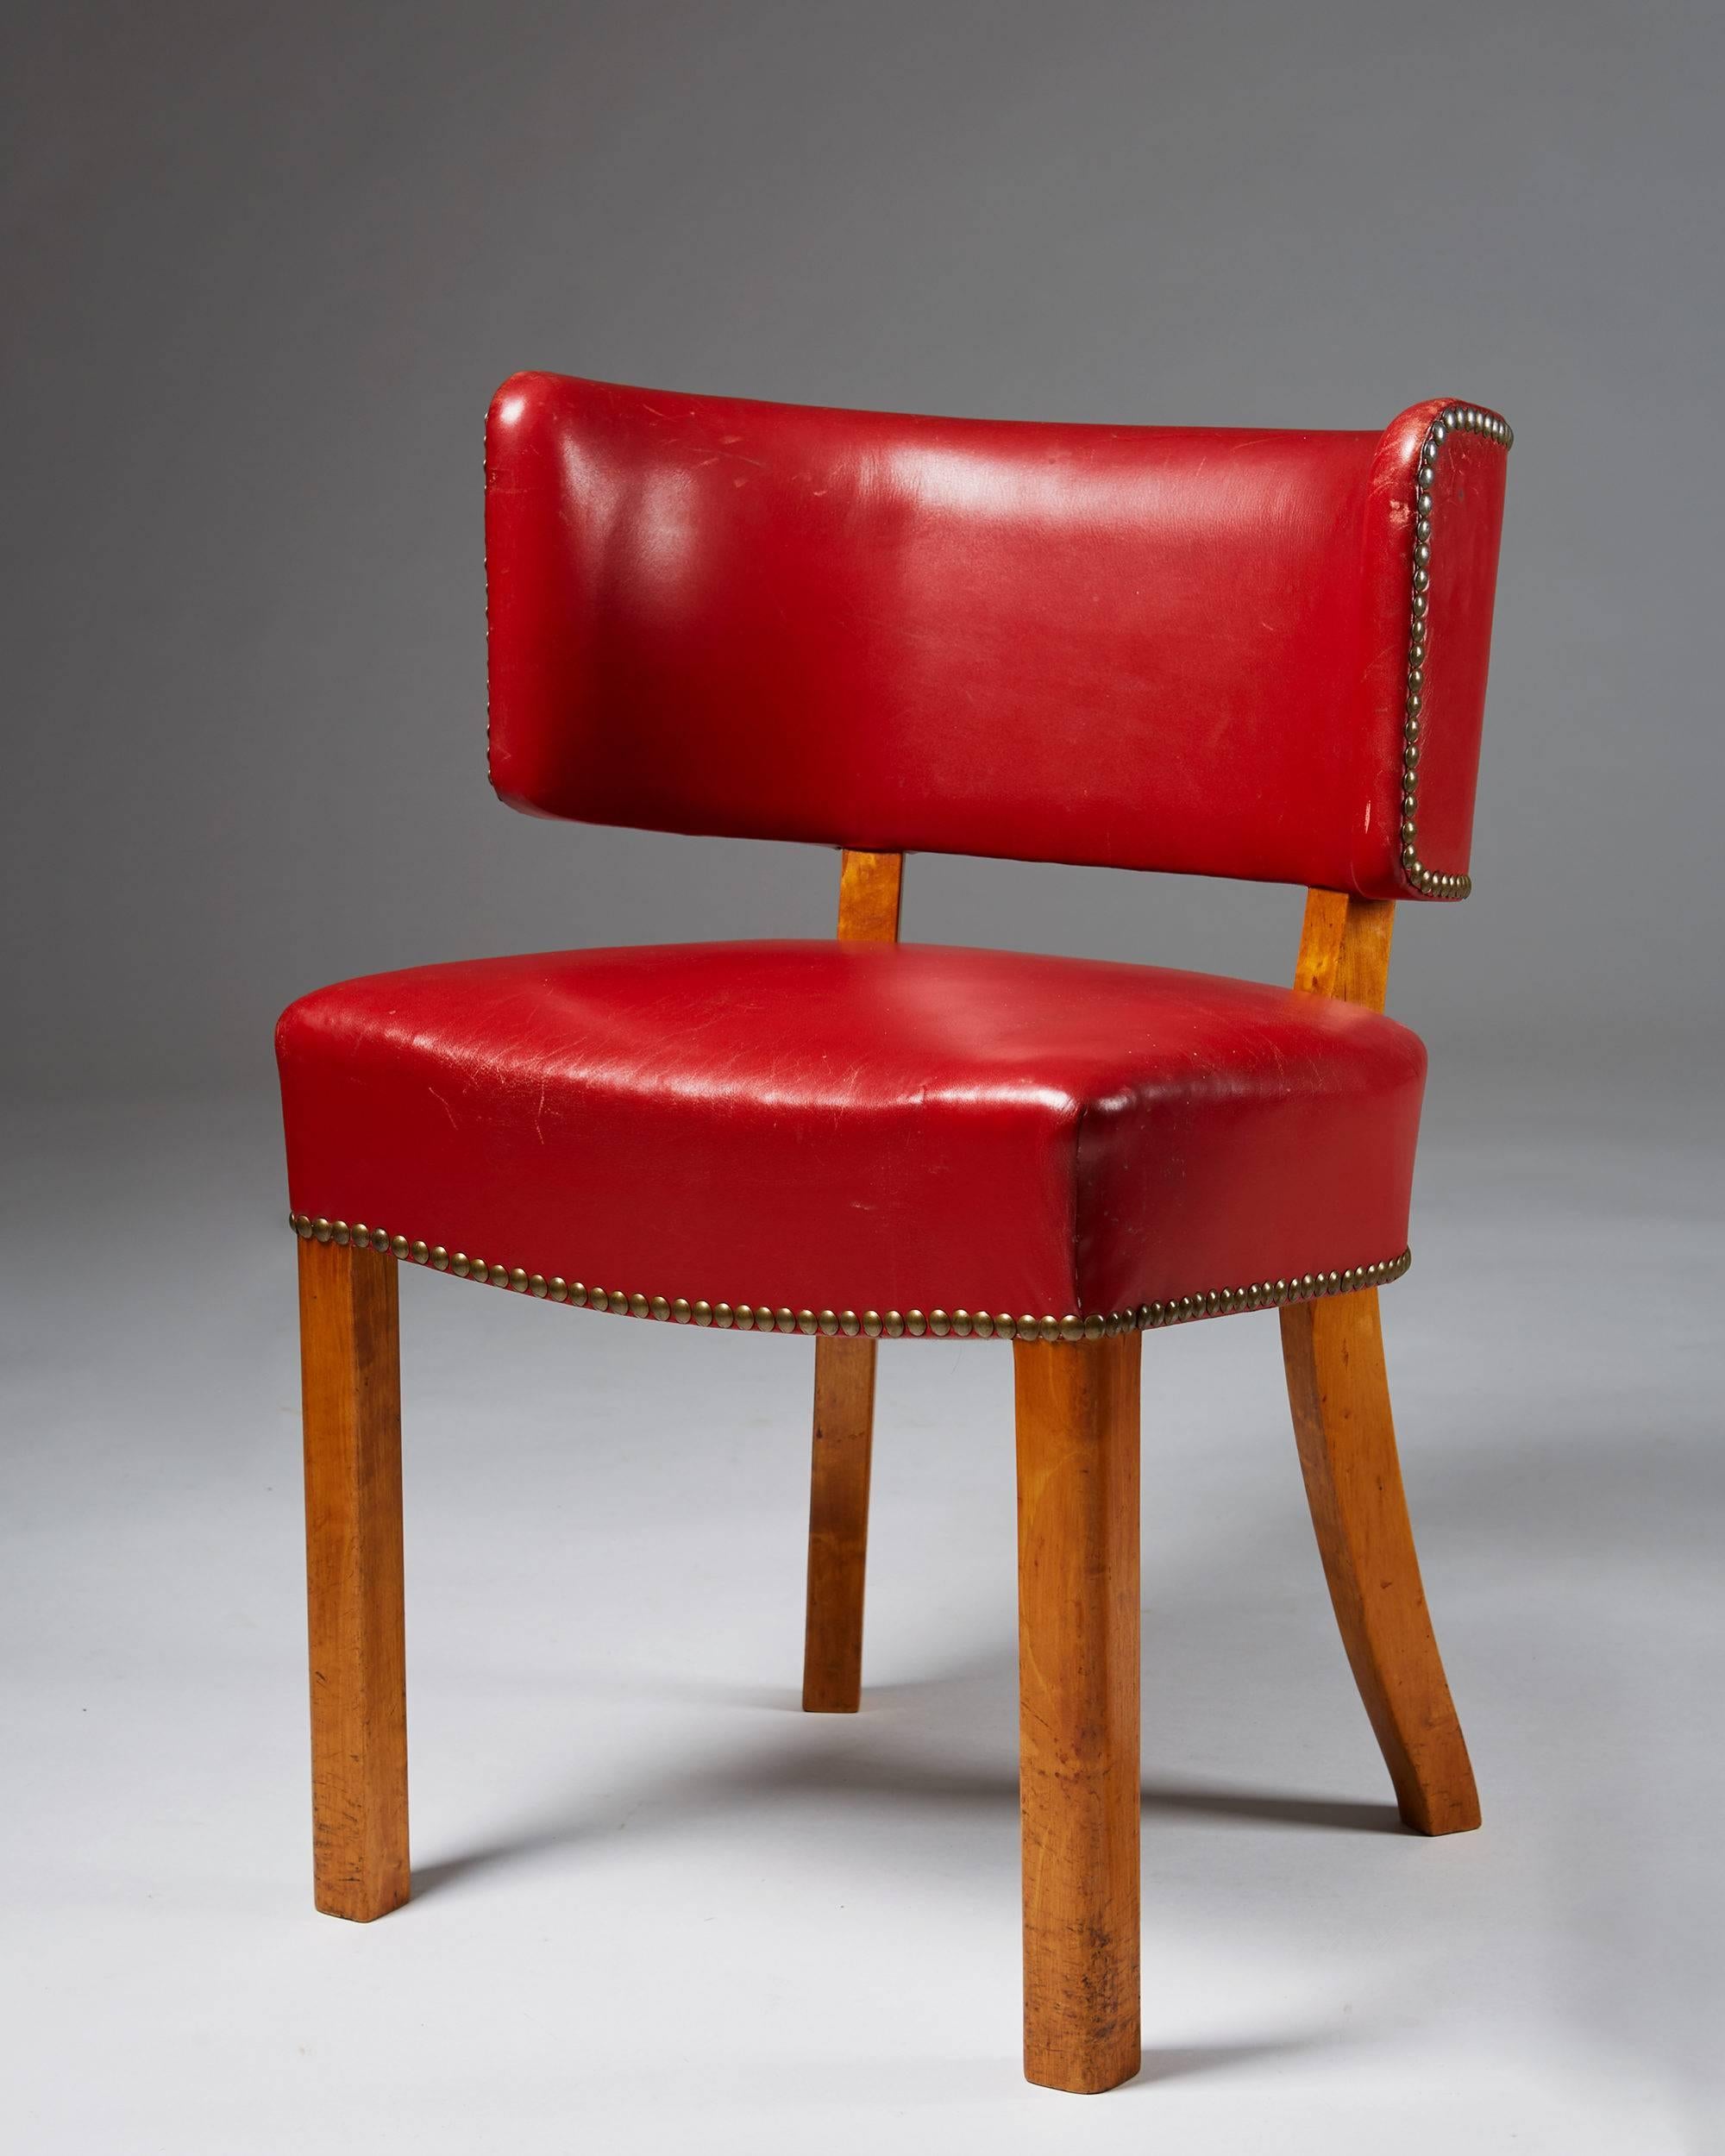 Set of six chairs, anonymous, Denmark, 1950s.
Birch and original red leather.

H: 78 cm/ 2' 7''
W: 60 cm/ 2'
D: 48 cm/ 18 7/8''
SH: 49 cm/ 19 1/4''.